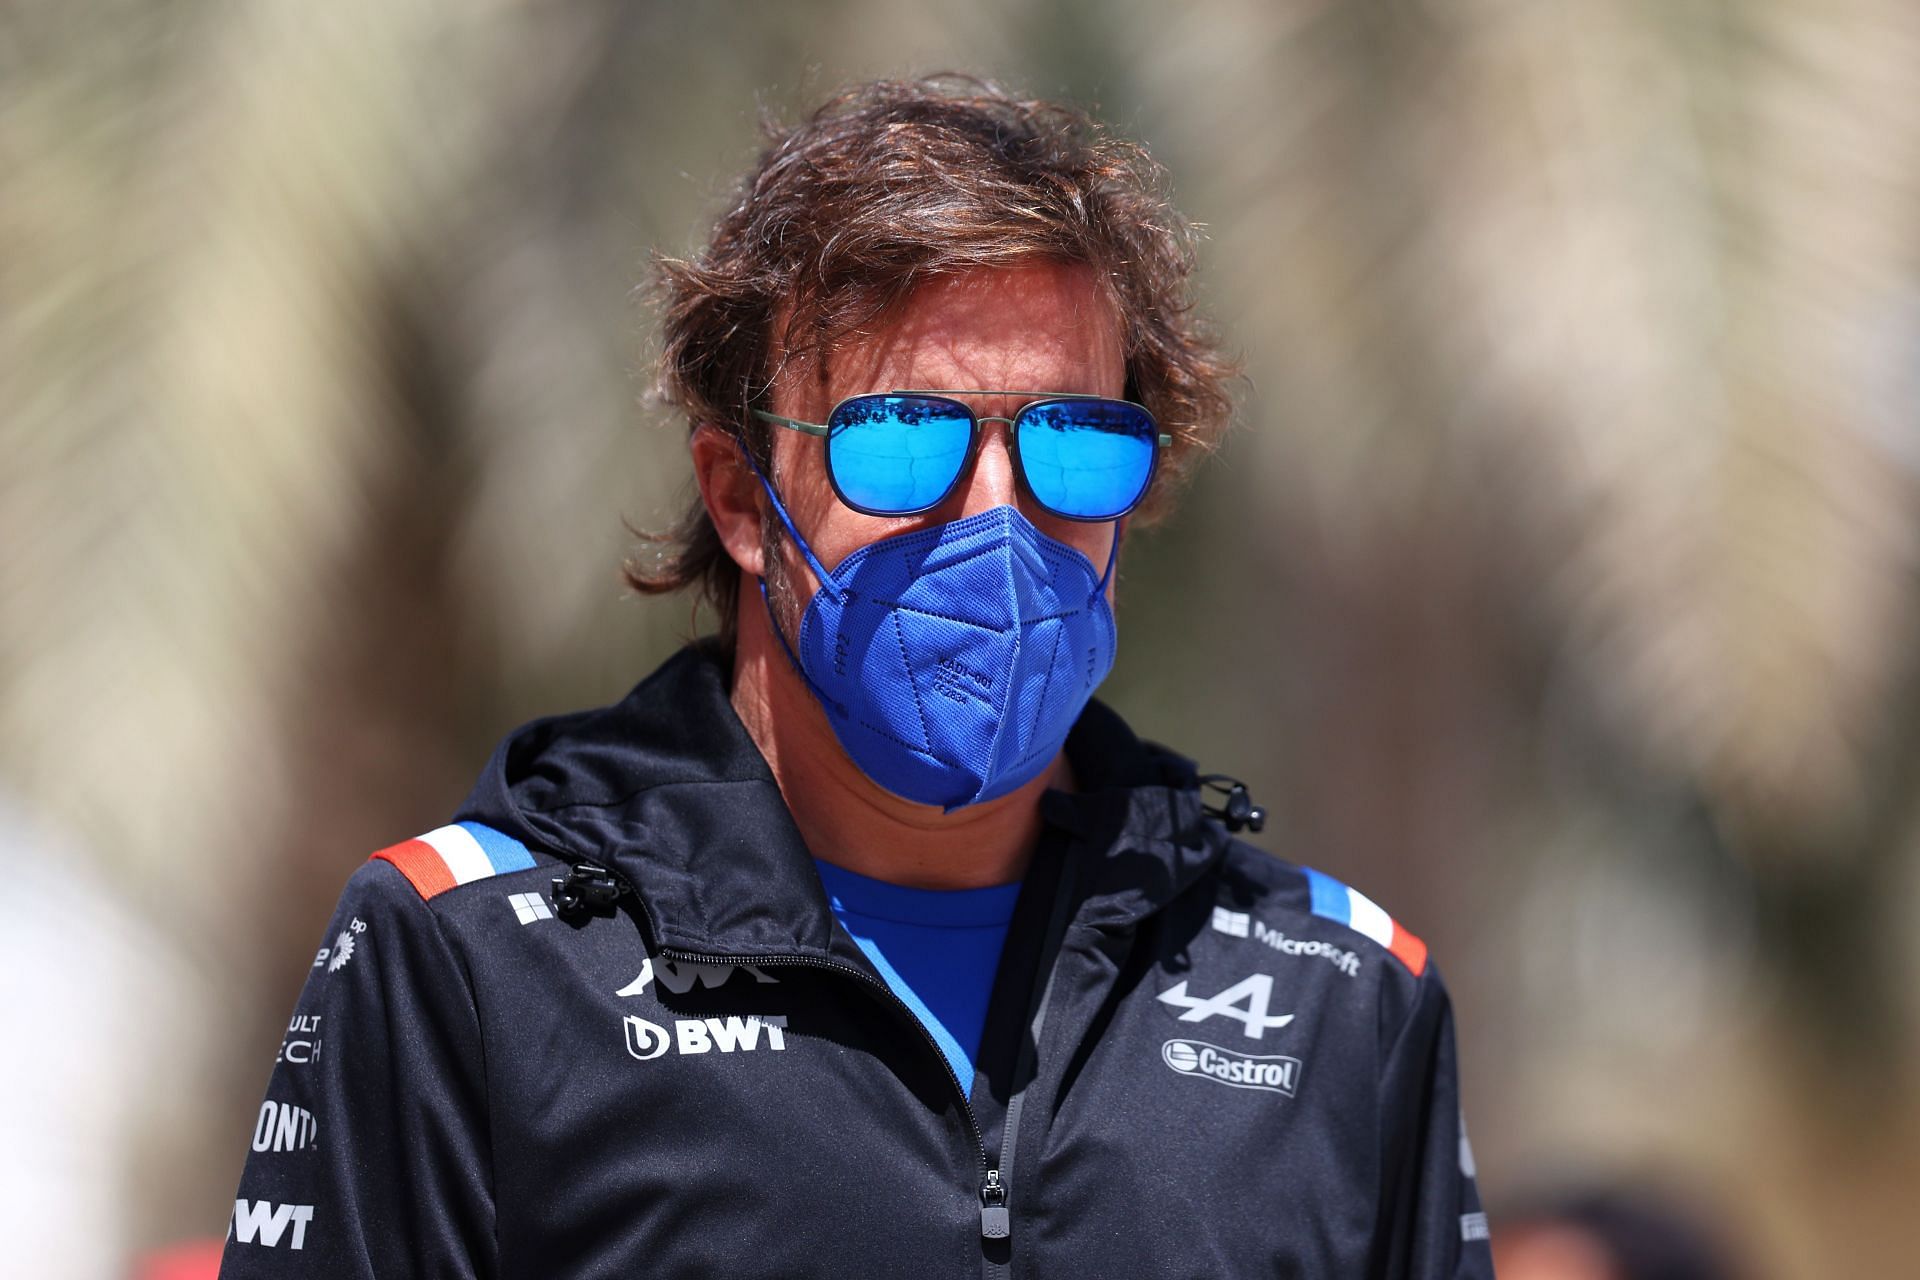 Fernando Alonso walks in the Paddock in Bahrain. (Photo by Lars Baron/Getty Images)